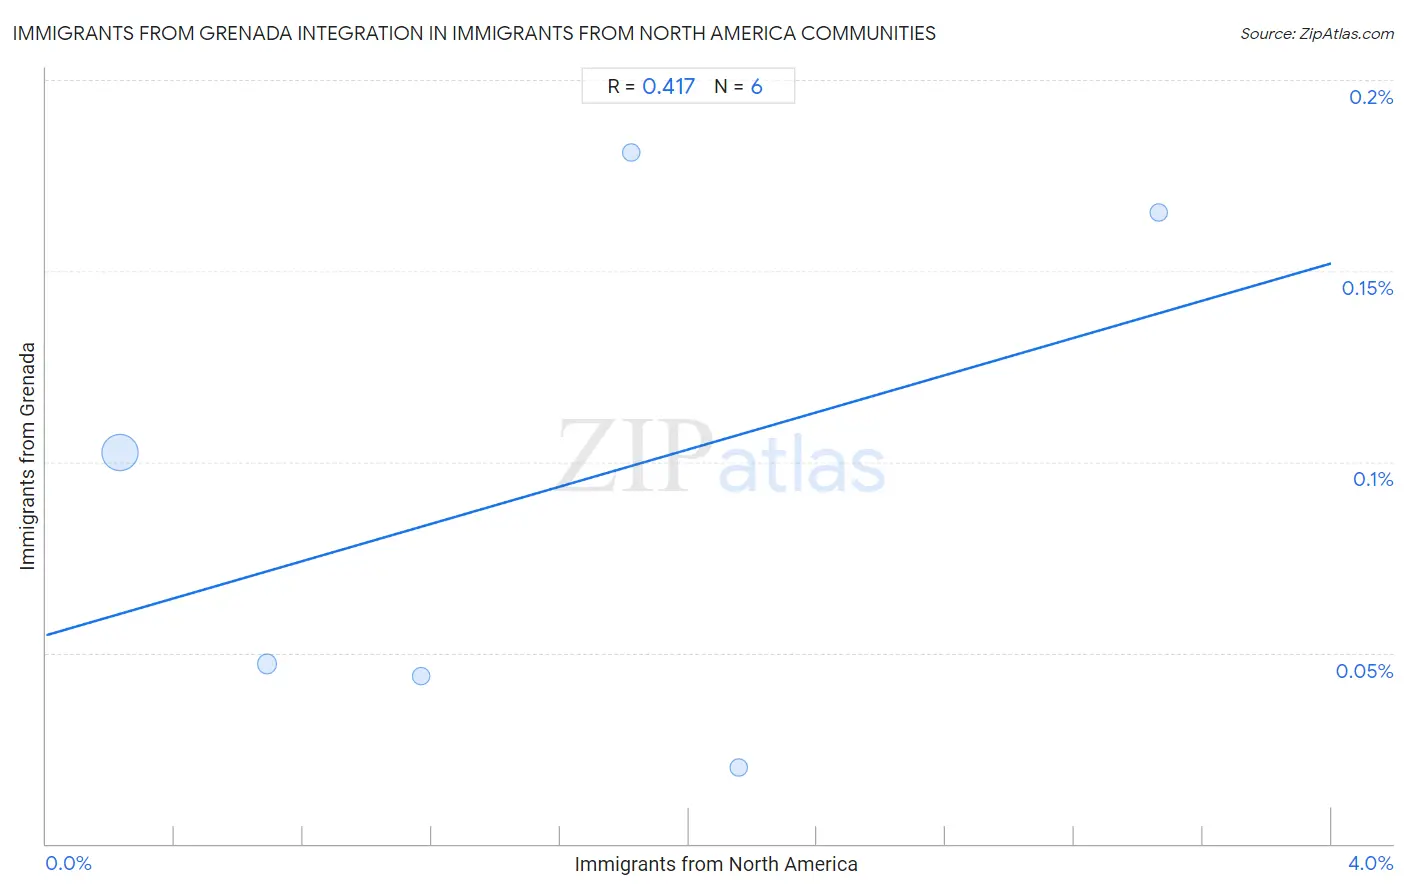 Immigrants from North America Integration in Immigrants from Grenada Communities